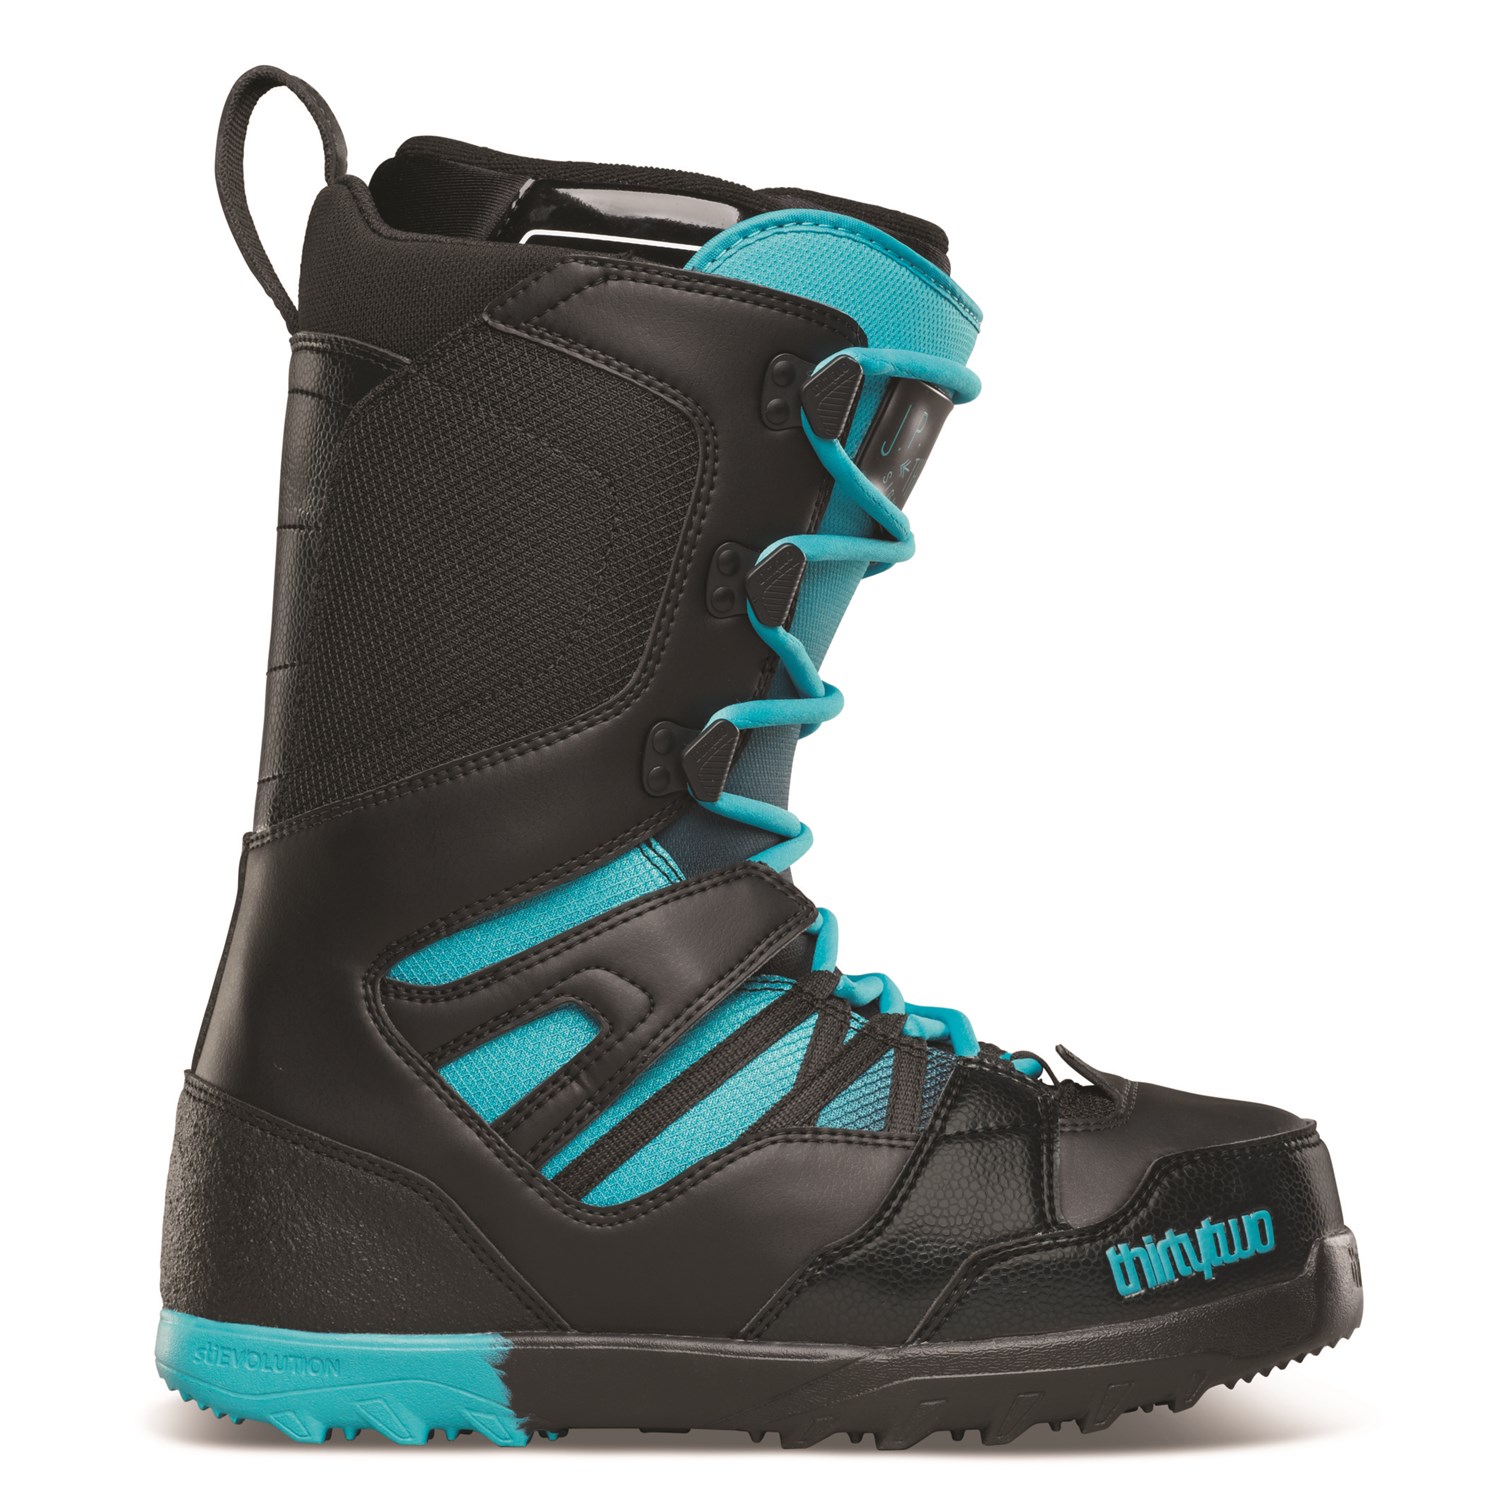 Snowboarding boots for the sizzling winters